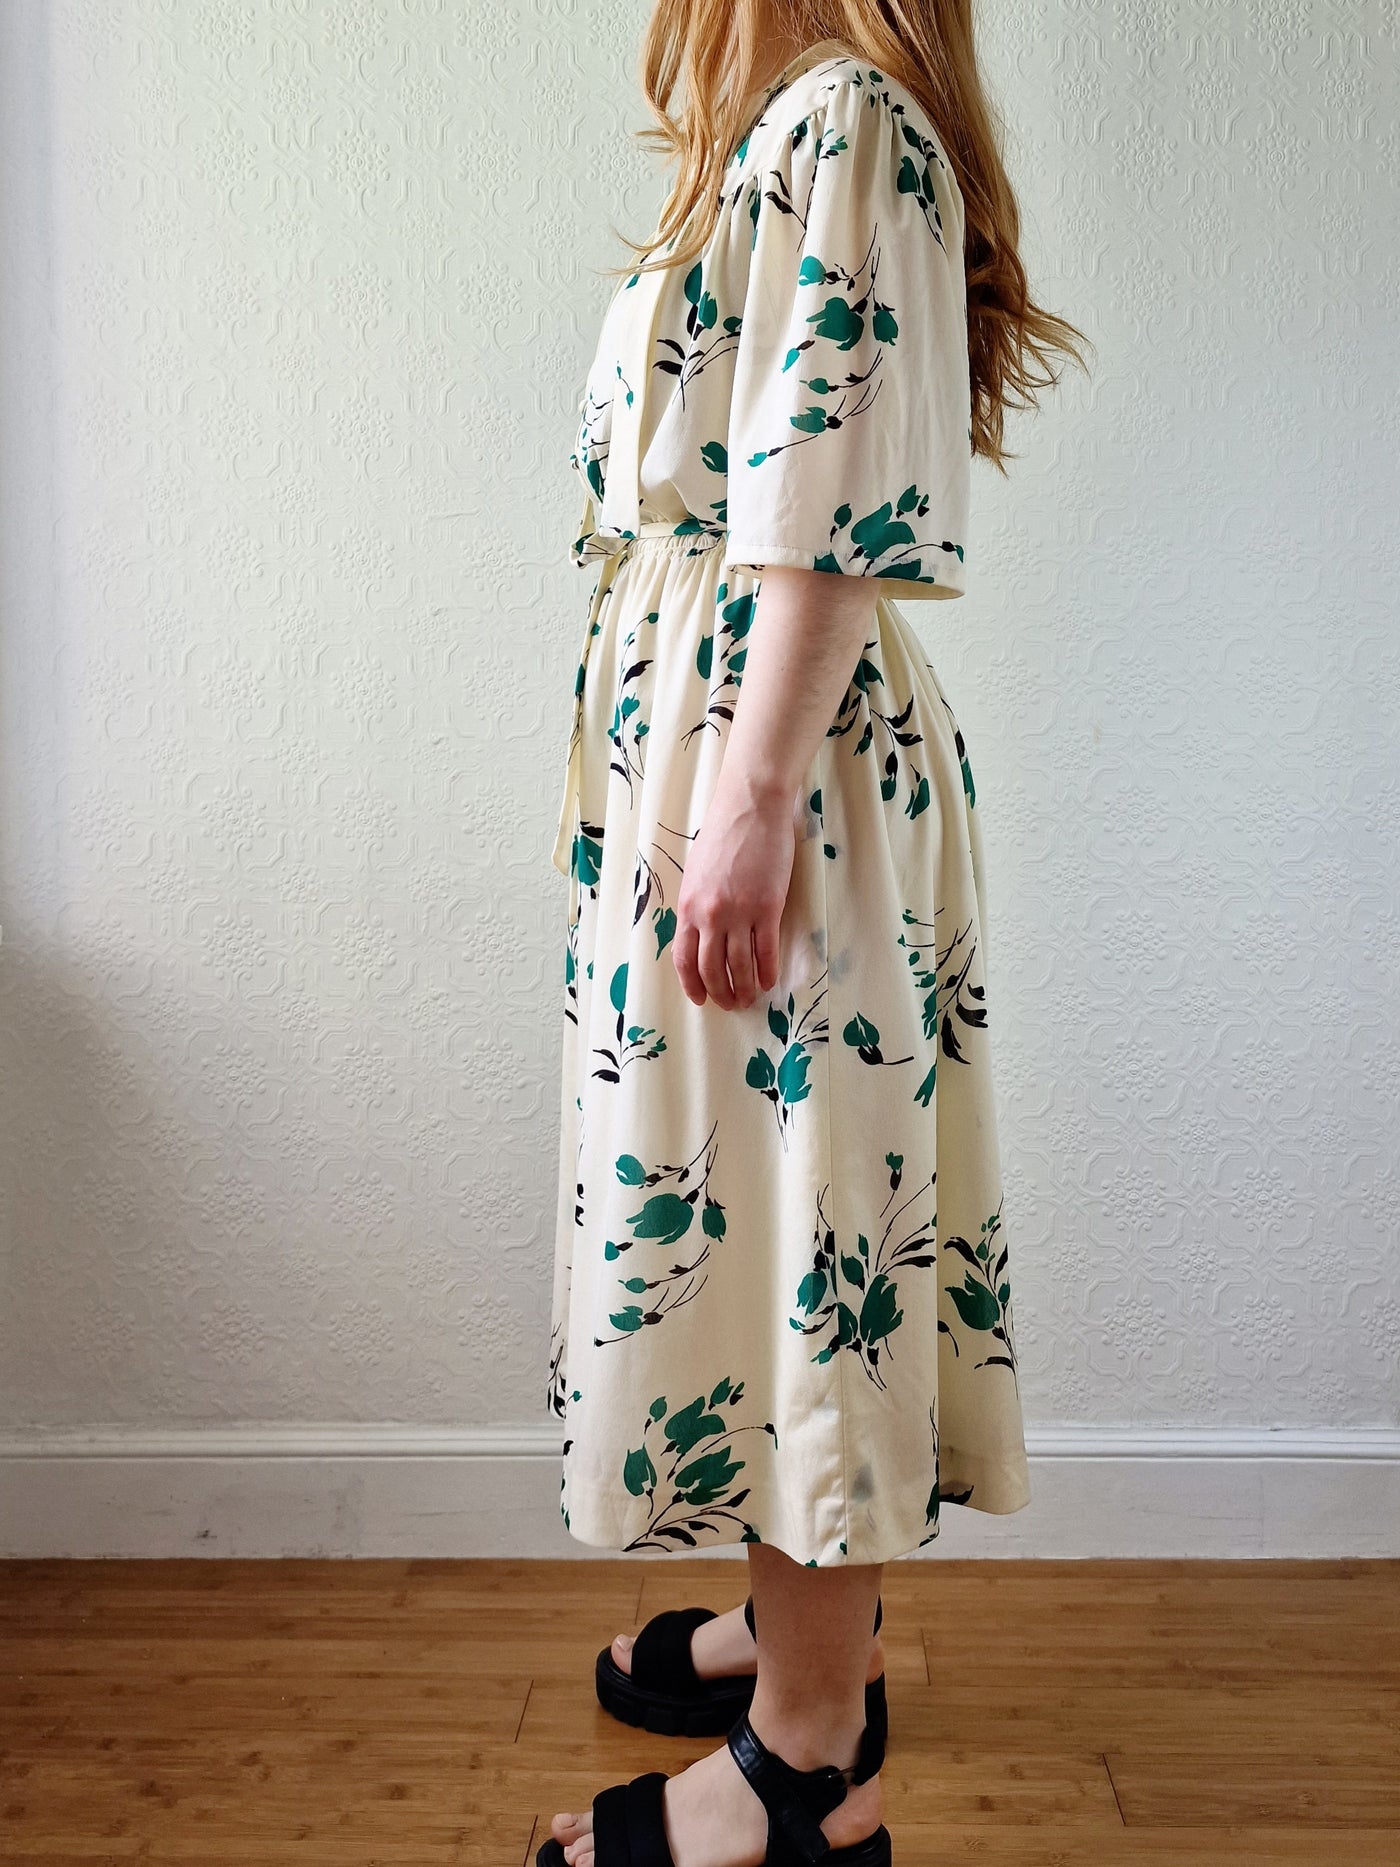 Vintage 70s Cream Floral Midi Dress with Short Sleeves - M/L